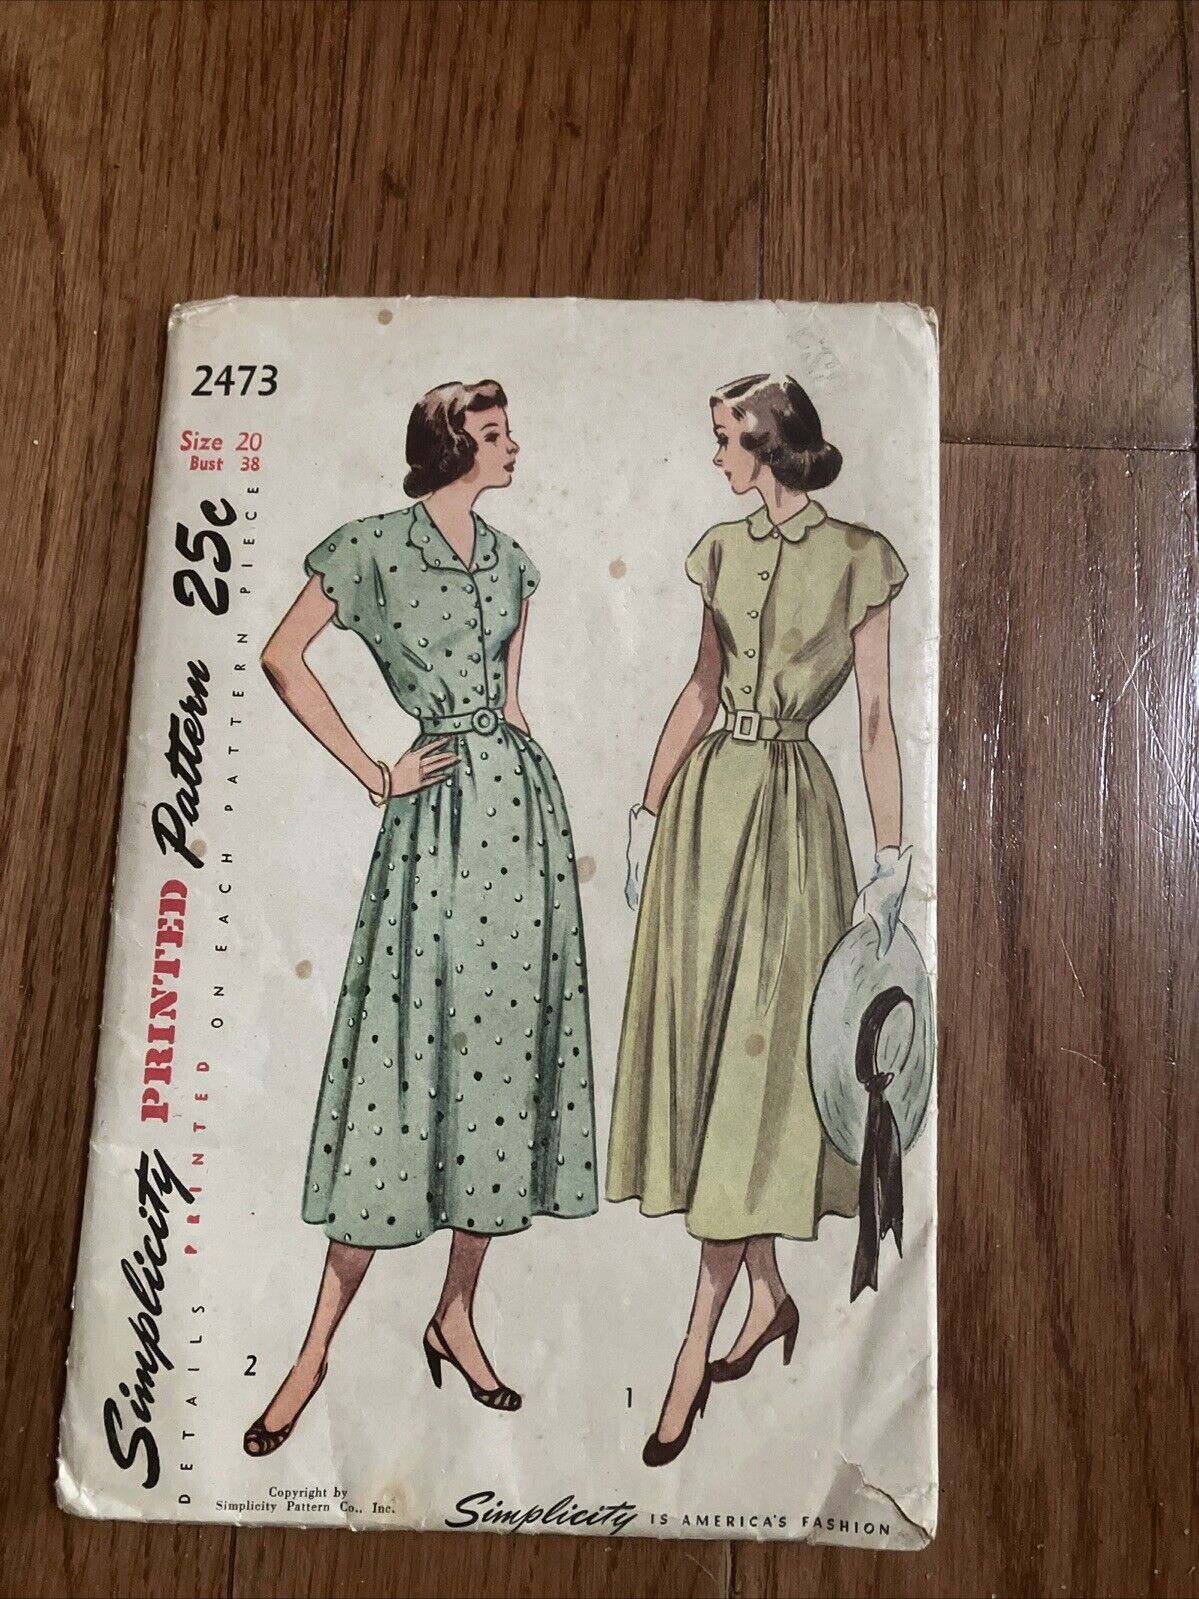 Vintage Simplicity 2473 Sewing Pattern  Size 20  Bust 38